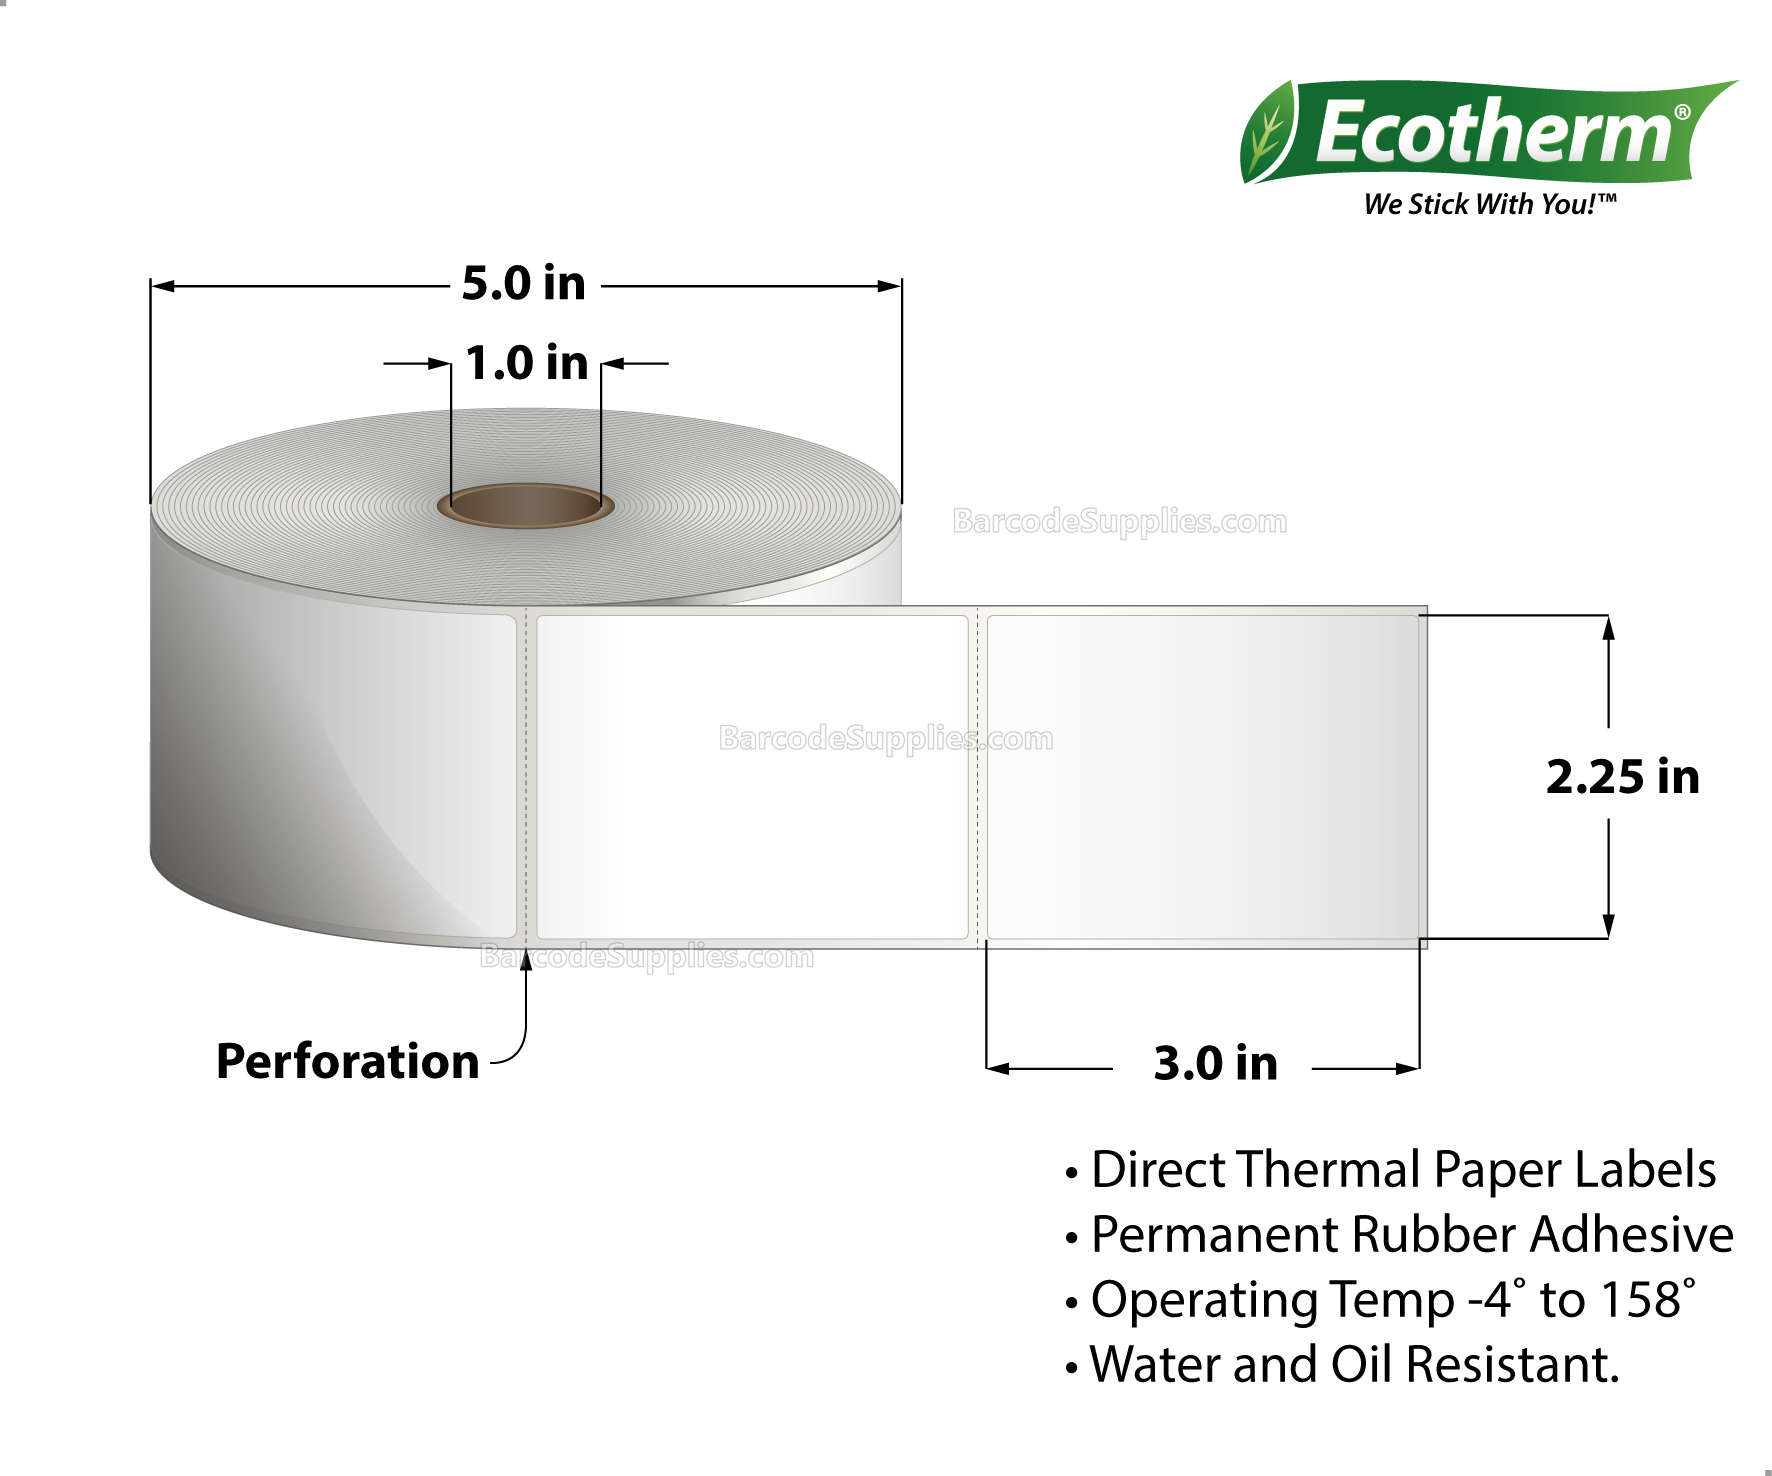 2.25 x 3 Direct Thermal White Labels With Rubber Adhesive - Perforated - 840 Labels Per Roll - Carton Of 6 Rolls - 5040 Labels Total - MPN: ECOTHERM15131-6